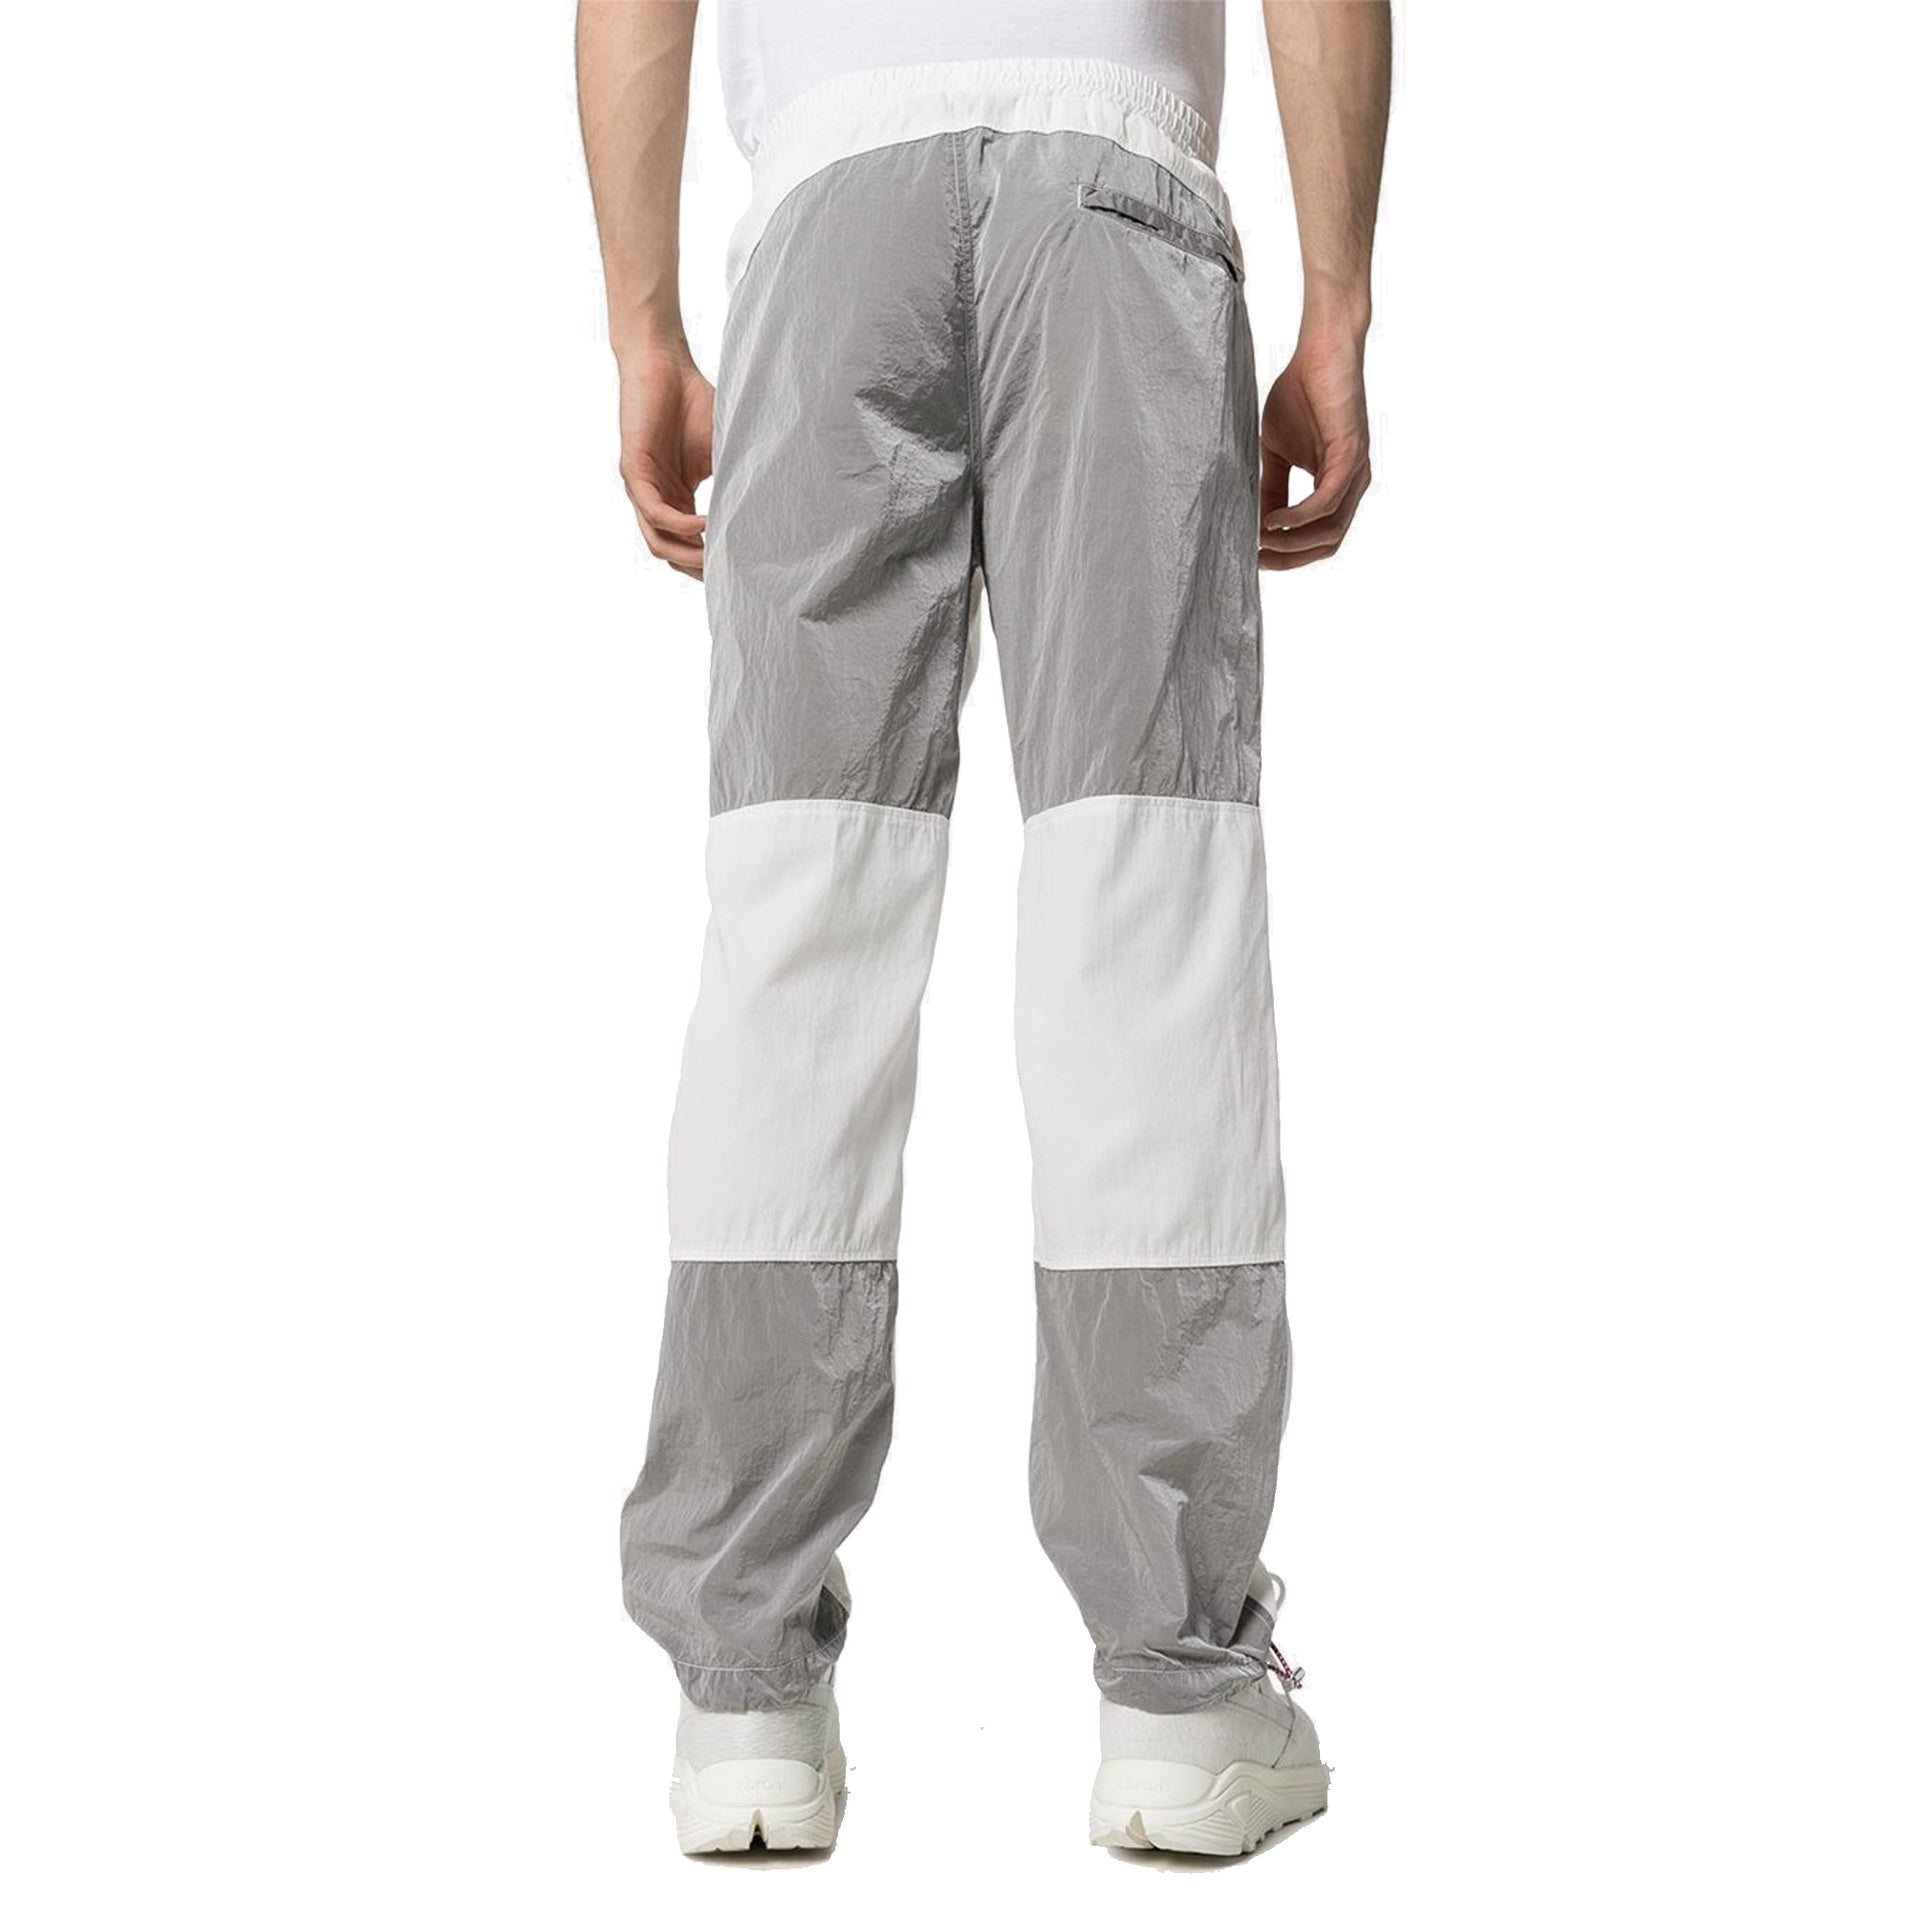 MONCLER-OUTLET-SALE-Moncler-1952-Two-Tone-Track-Pants-Hosen-WHITE-48-ARCHIVE-COLLECTION-3.jpg